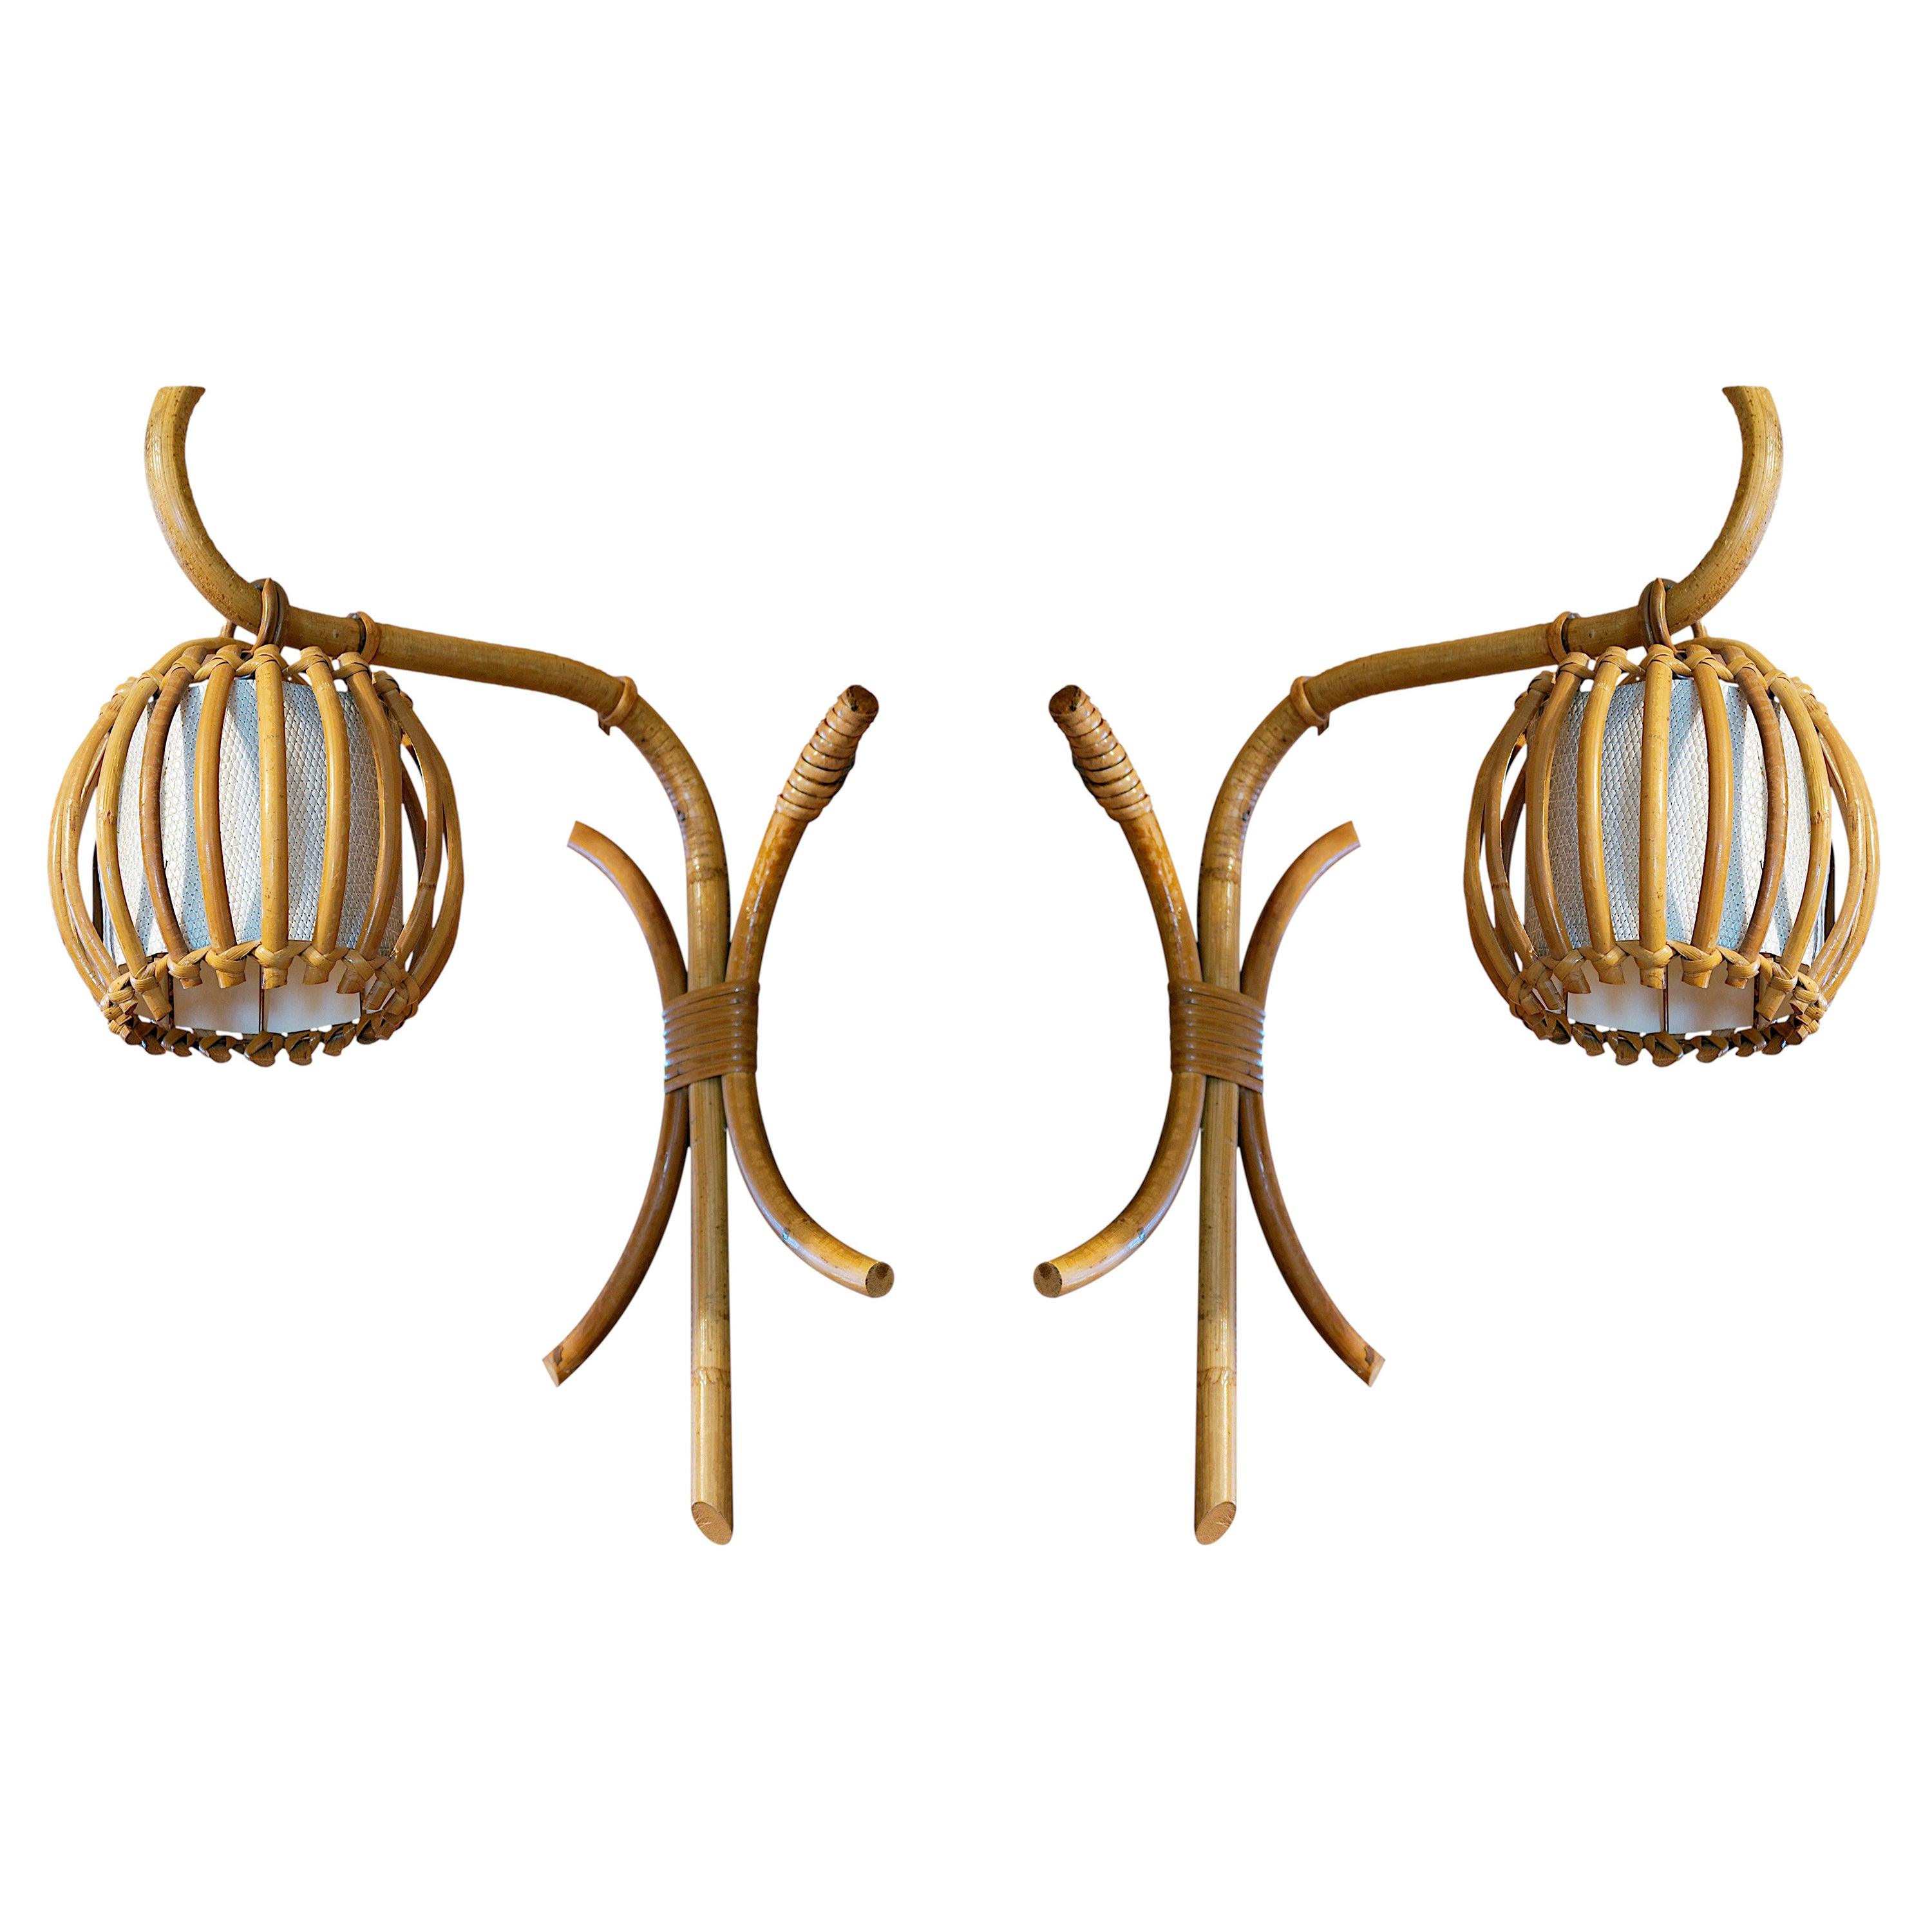 Louis Sognot Pair of Bamboo Wall Sconces, 1950s